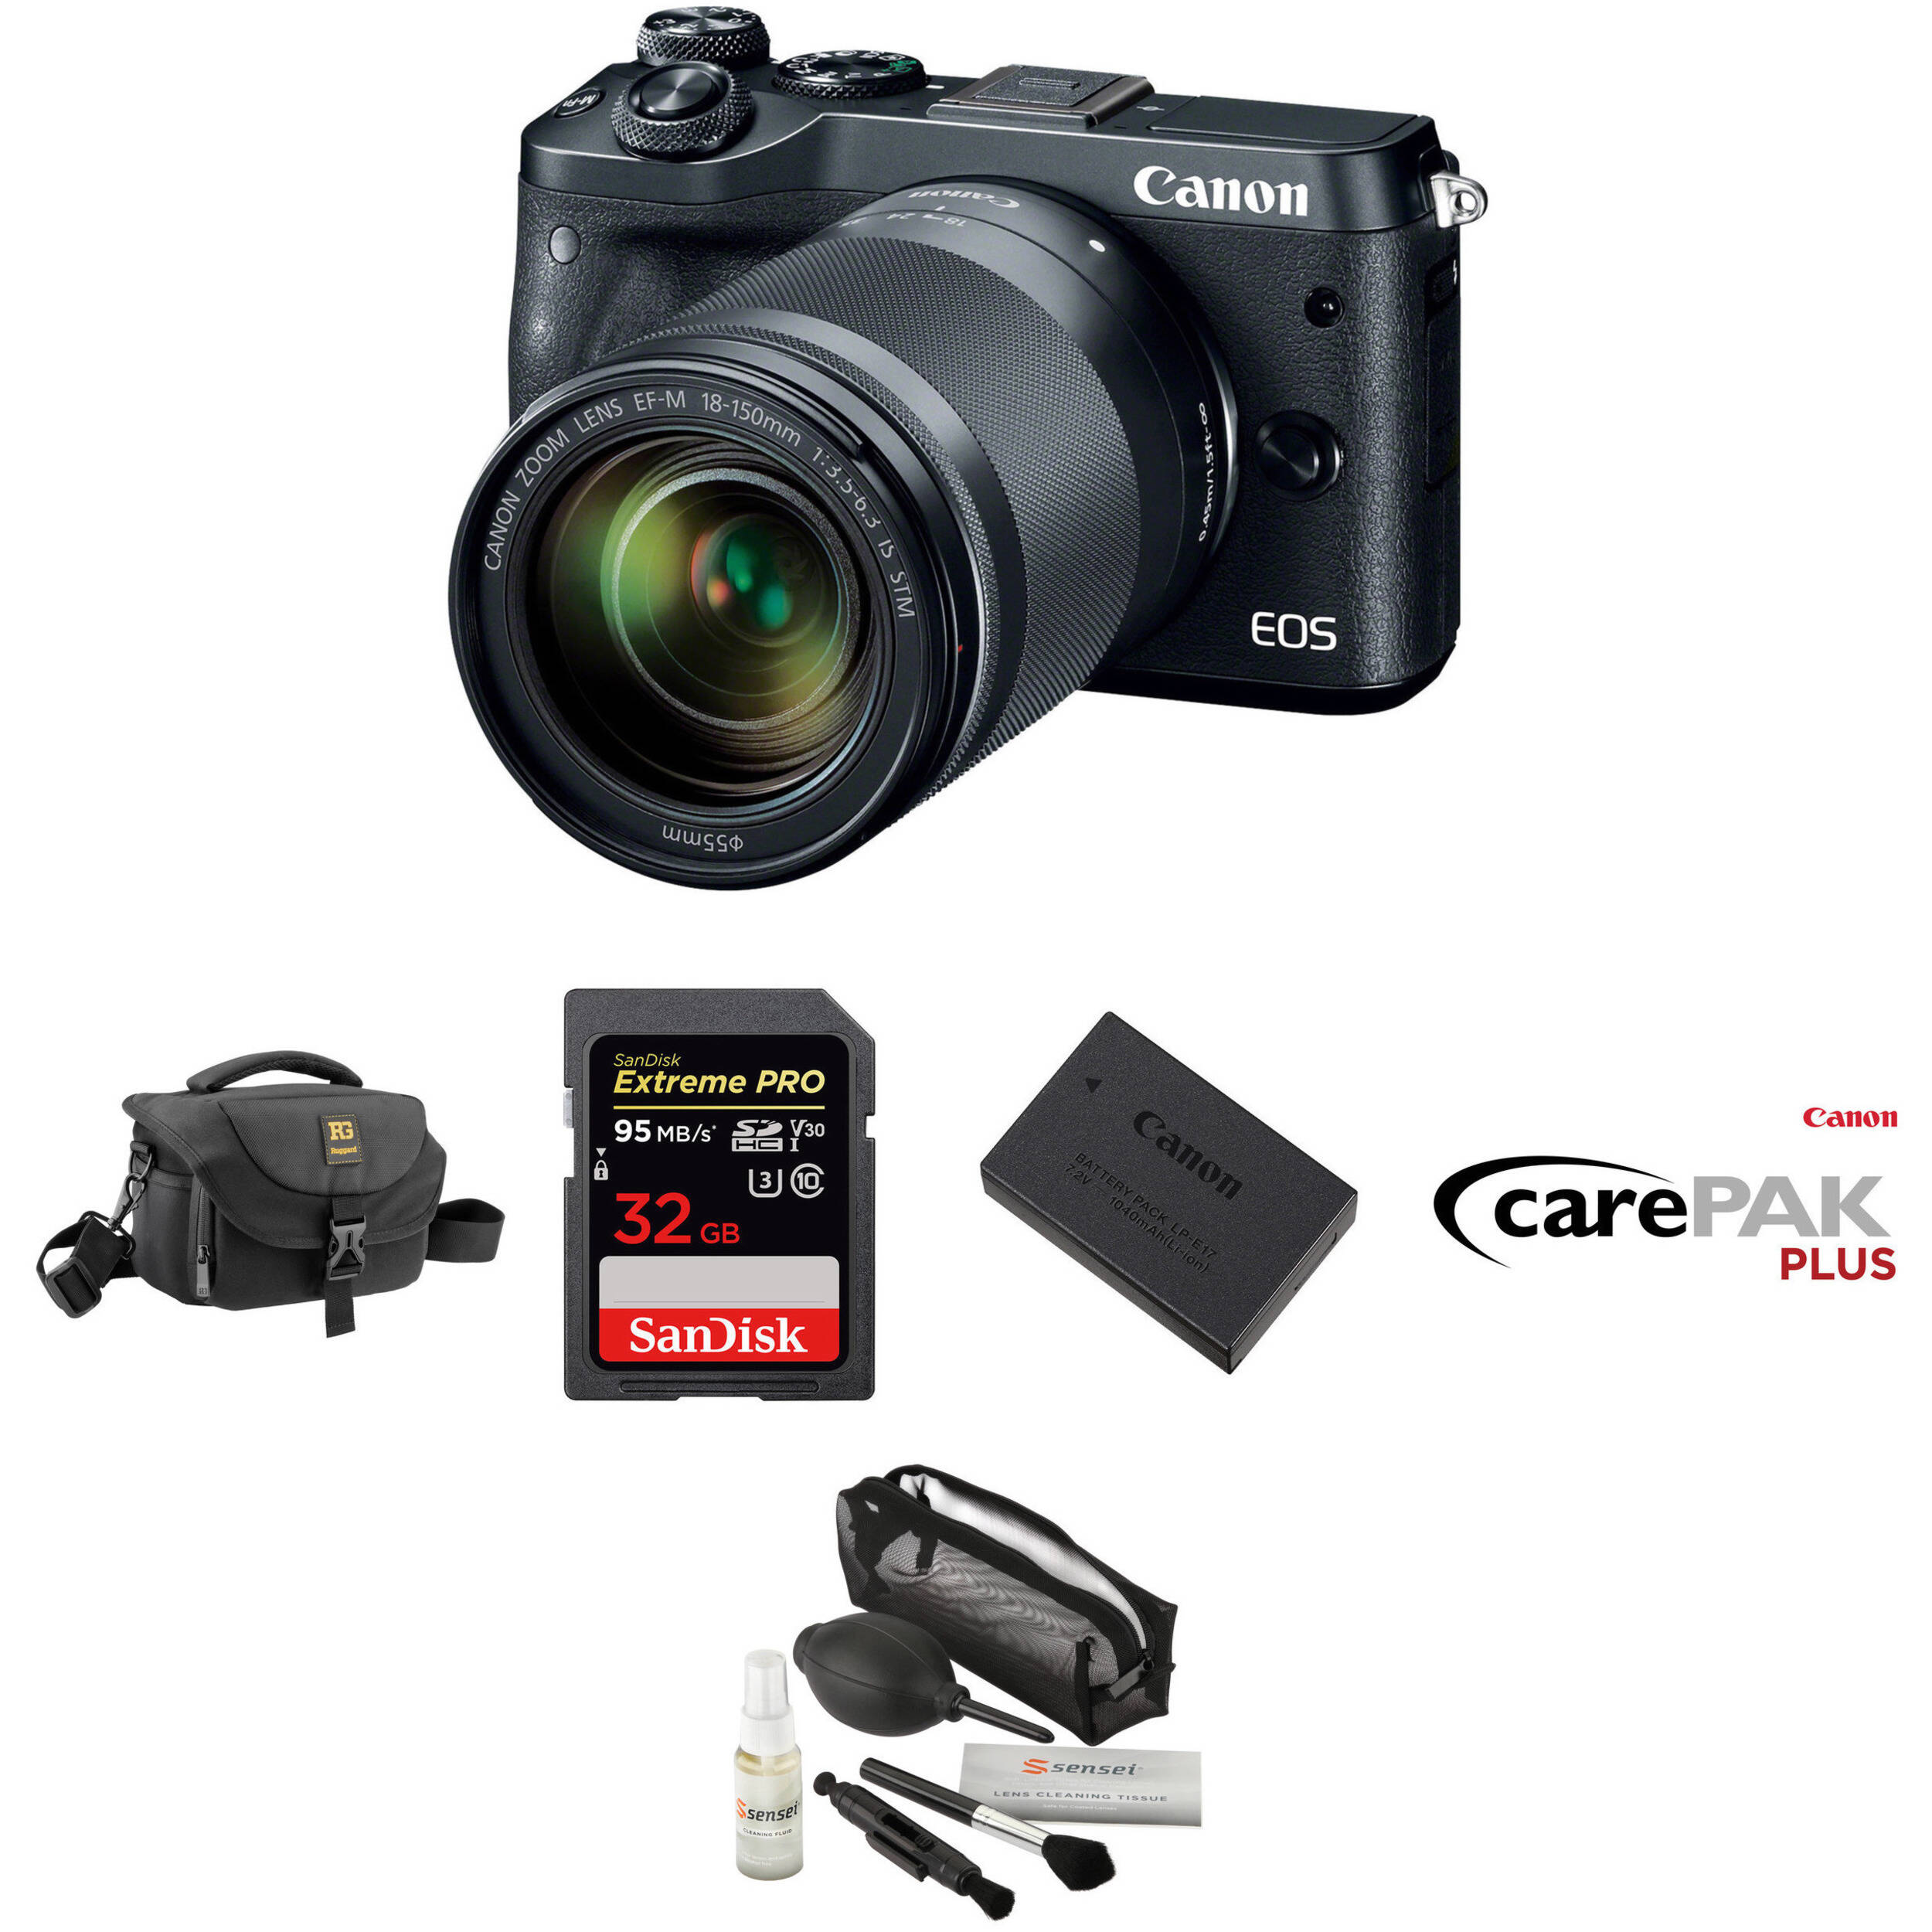 Canon eos m6 mirrorless digital camera with 18 150mm lens Canon Eos M6 Mirrorless Digital Camera With 18 150mm Lens Deluxe